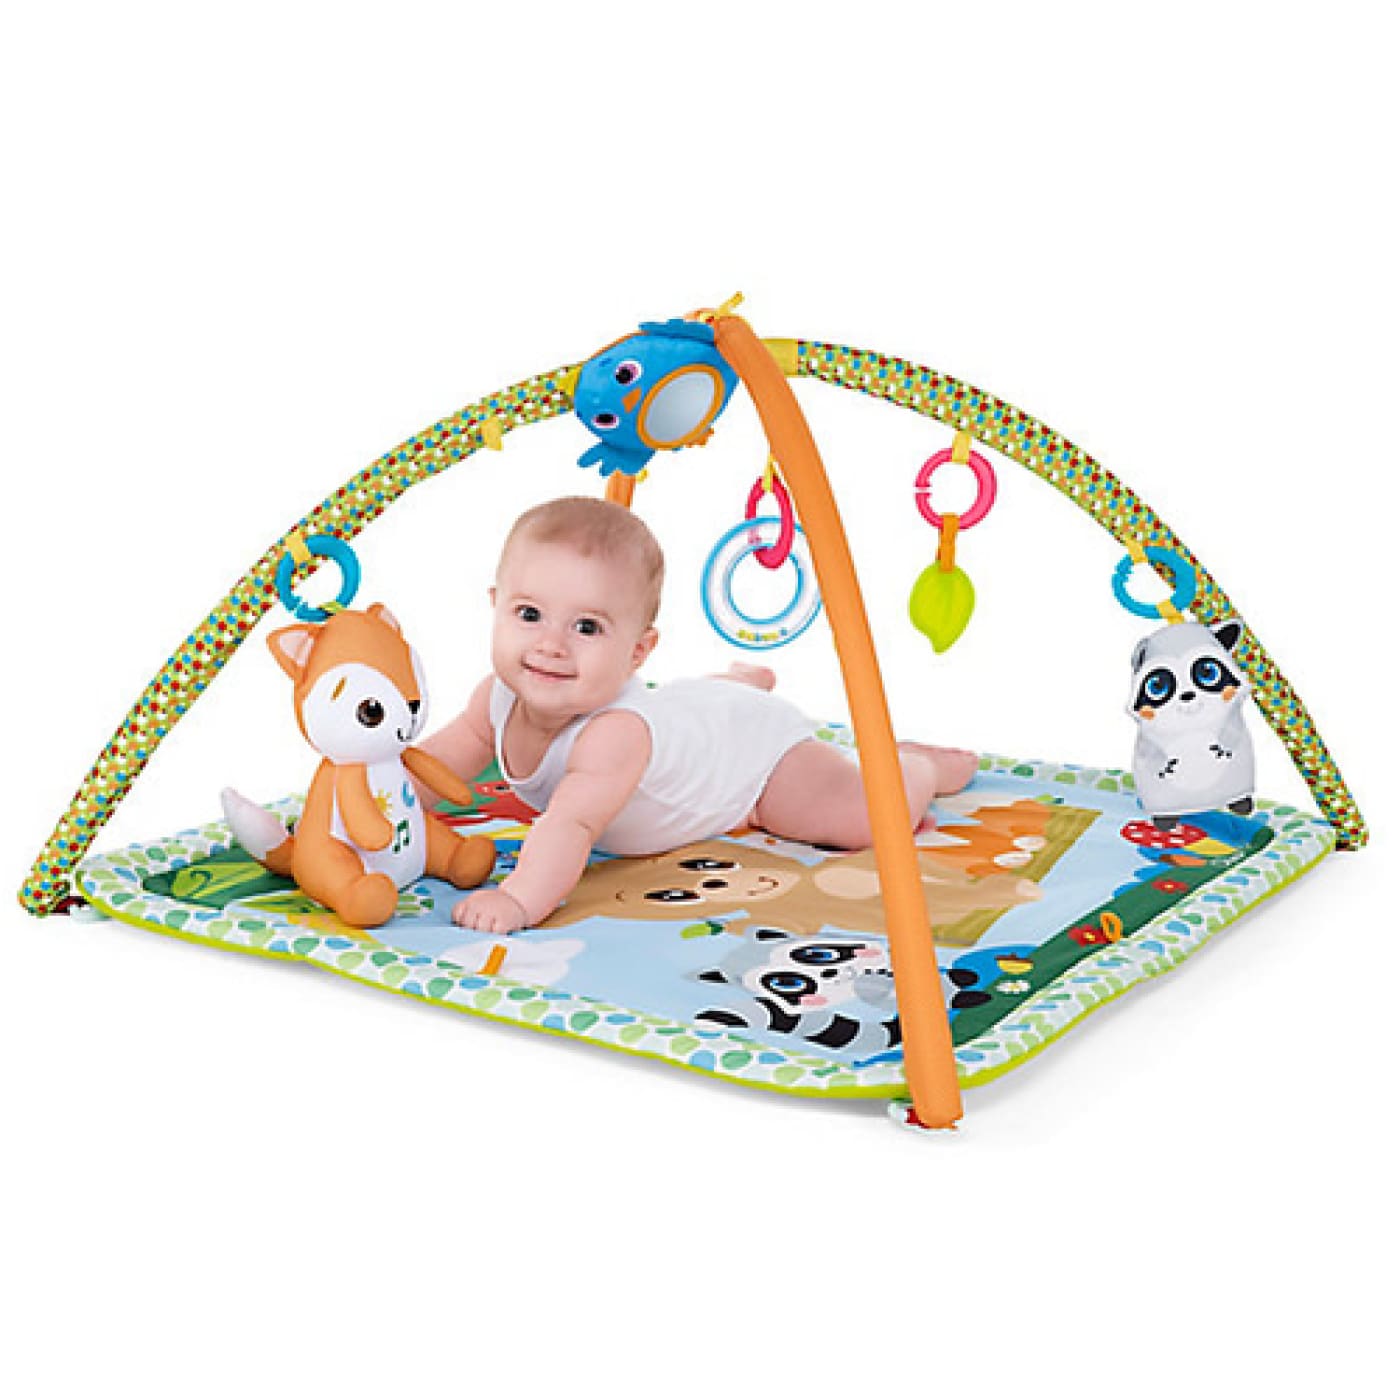 Chicco Magic Forest Relax & Play Gym - FOR MUM - MATERNITY PILLOWS